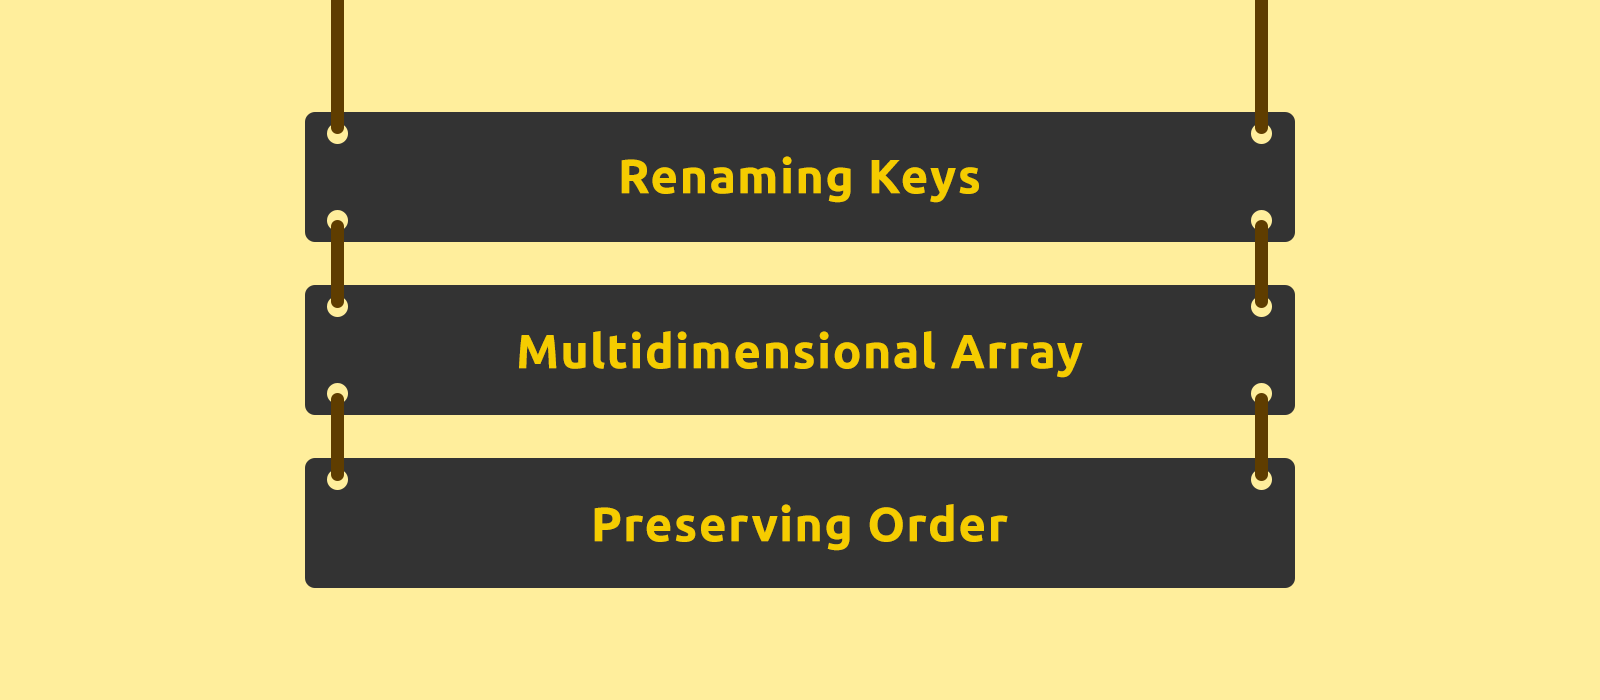 How to Rename the Keys of a Multidimensional Associative Array While Preserving Elements' Order